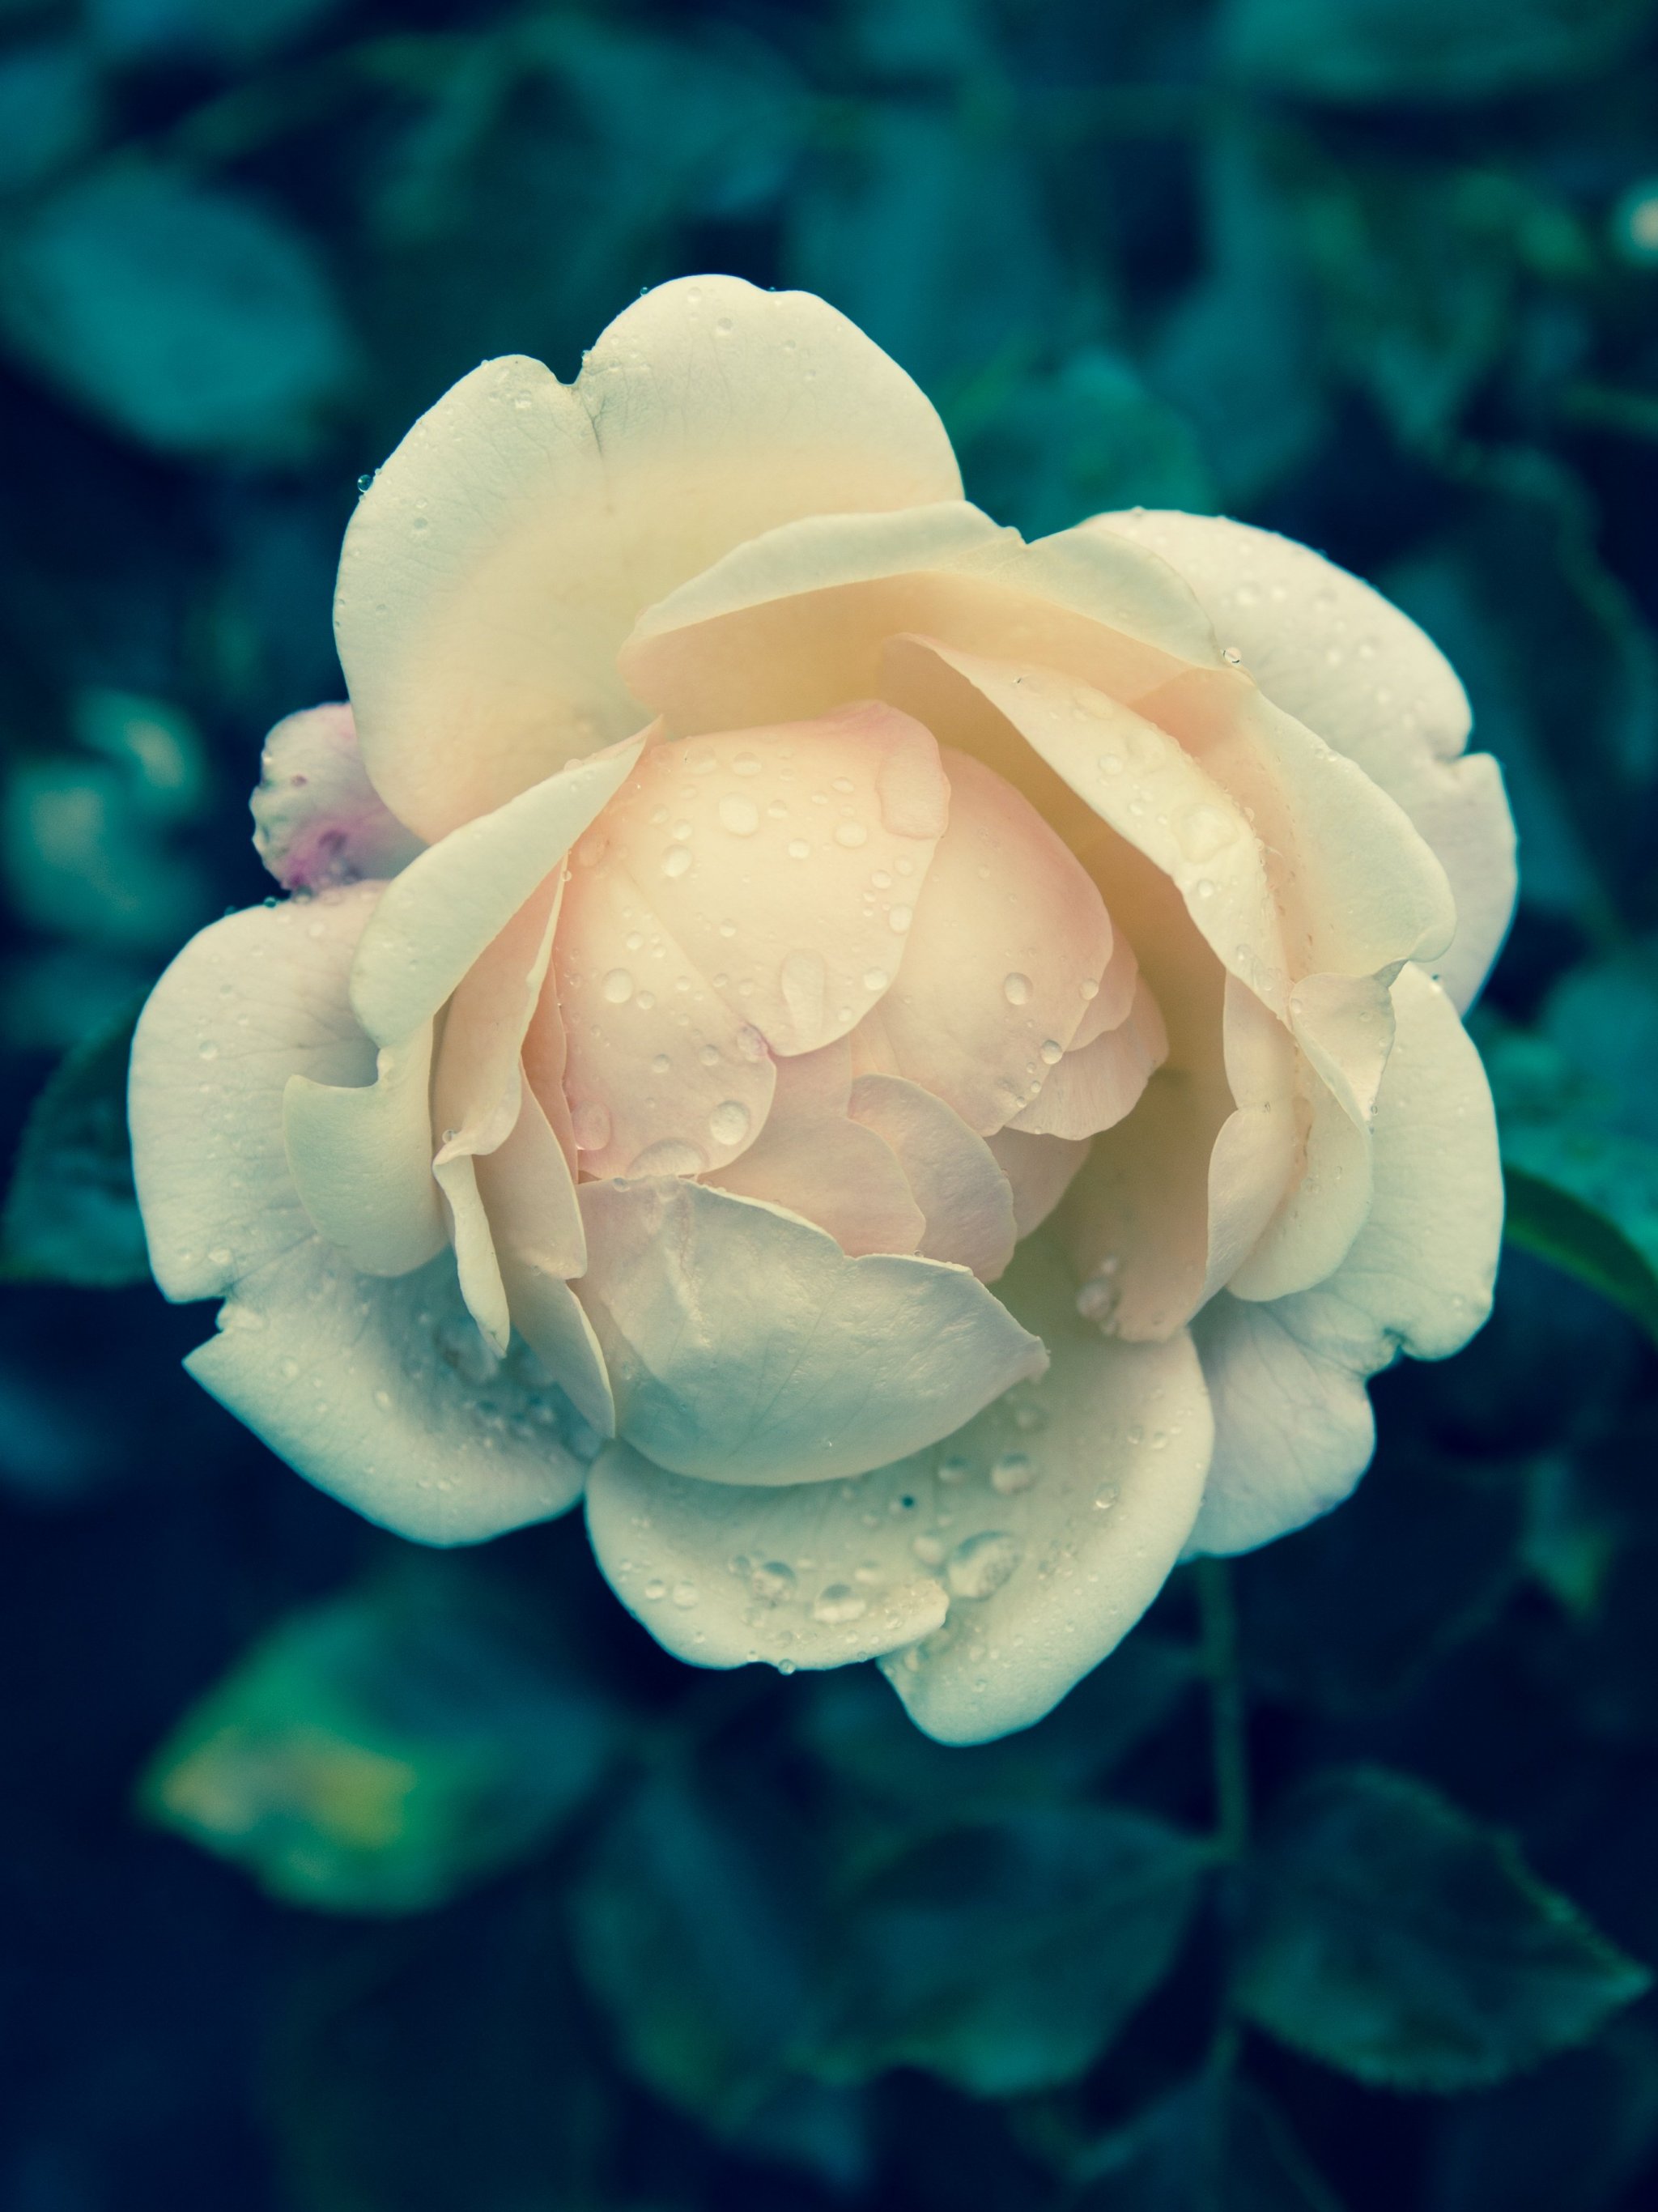 Pale Yellow Rose Wallpaper - iPhone, Android & Desktop Backgrounds